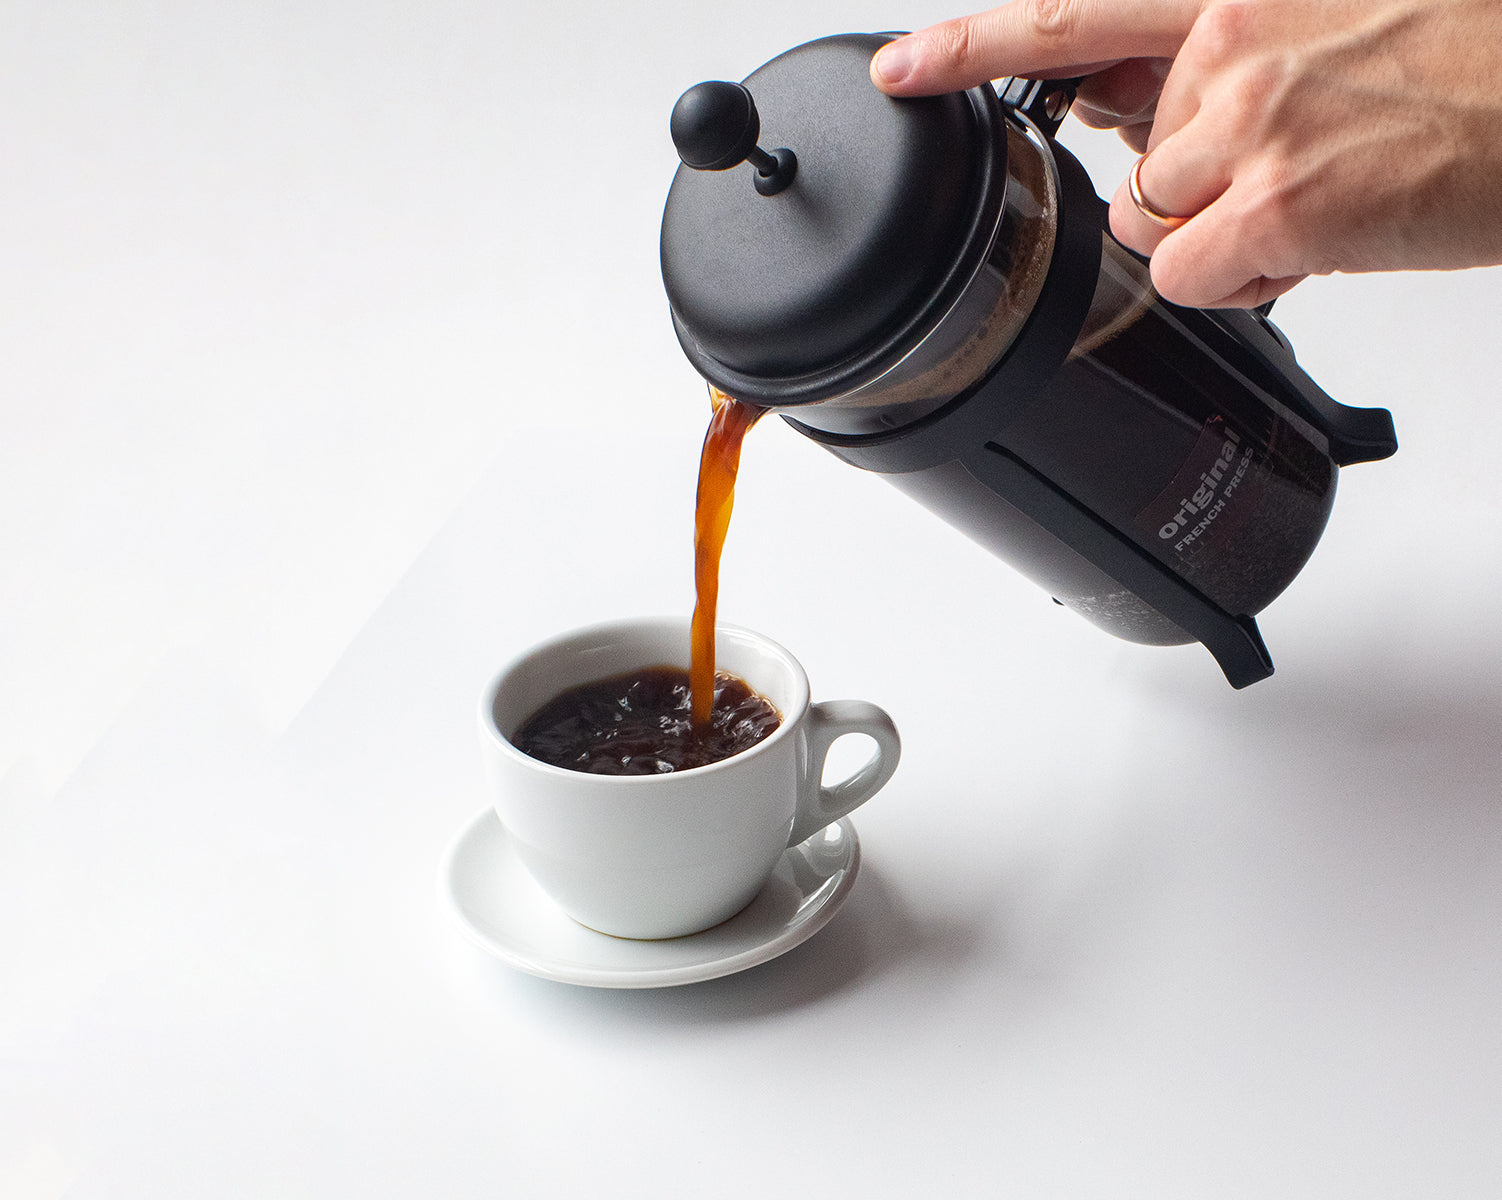 A French press pouring coffee into a cappuccino cup on a white background.